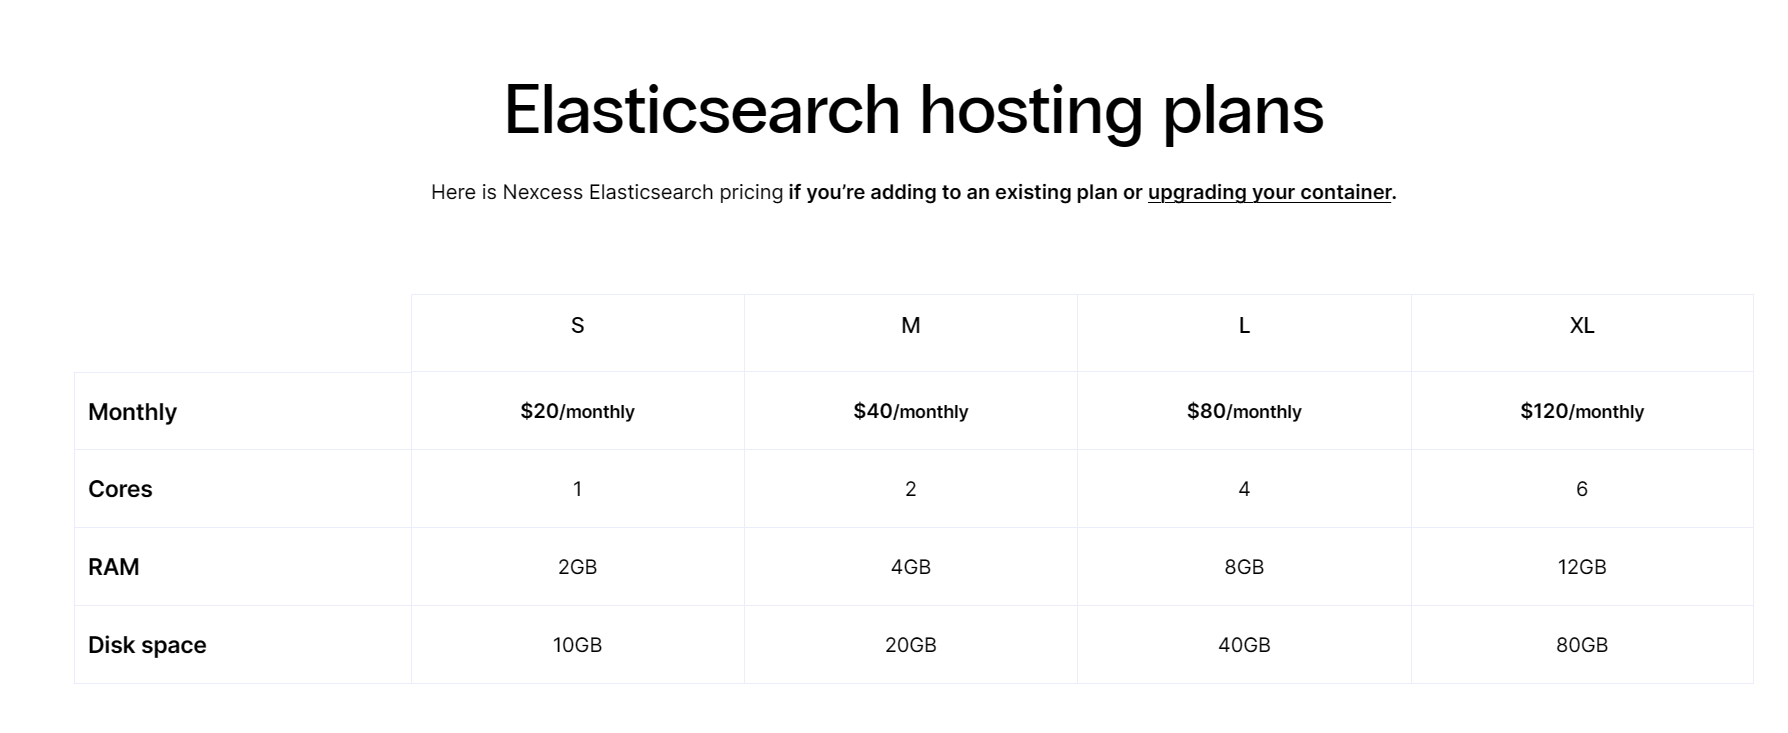 Elasticsearch cloud containers are the most popular of the currently available options at Nexcess.